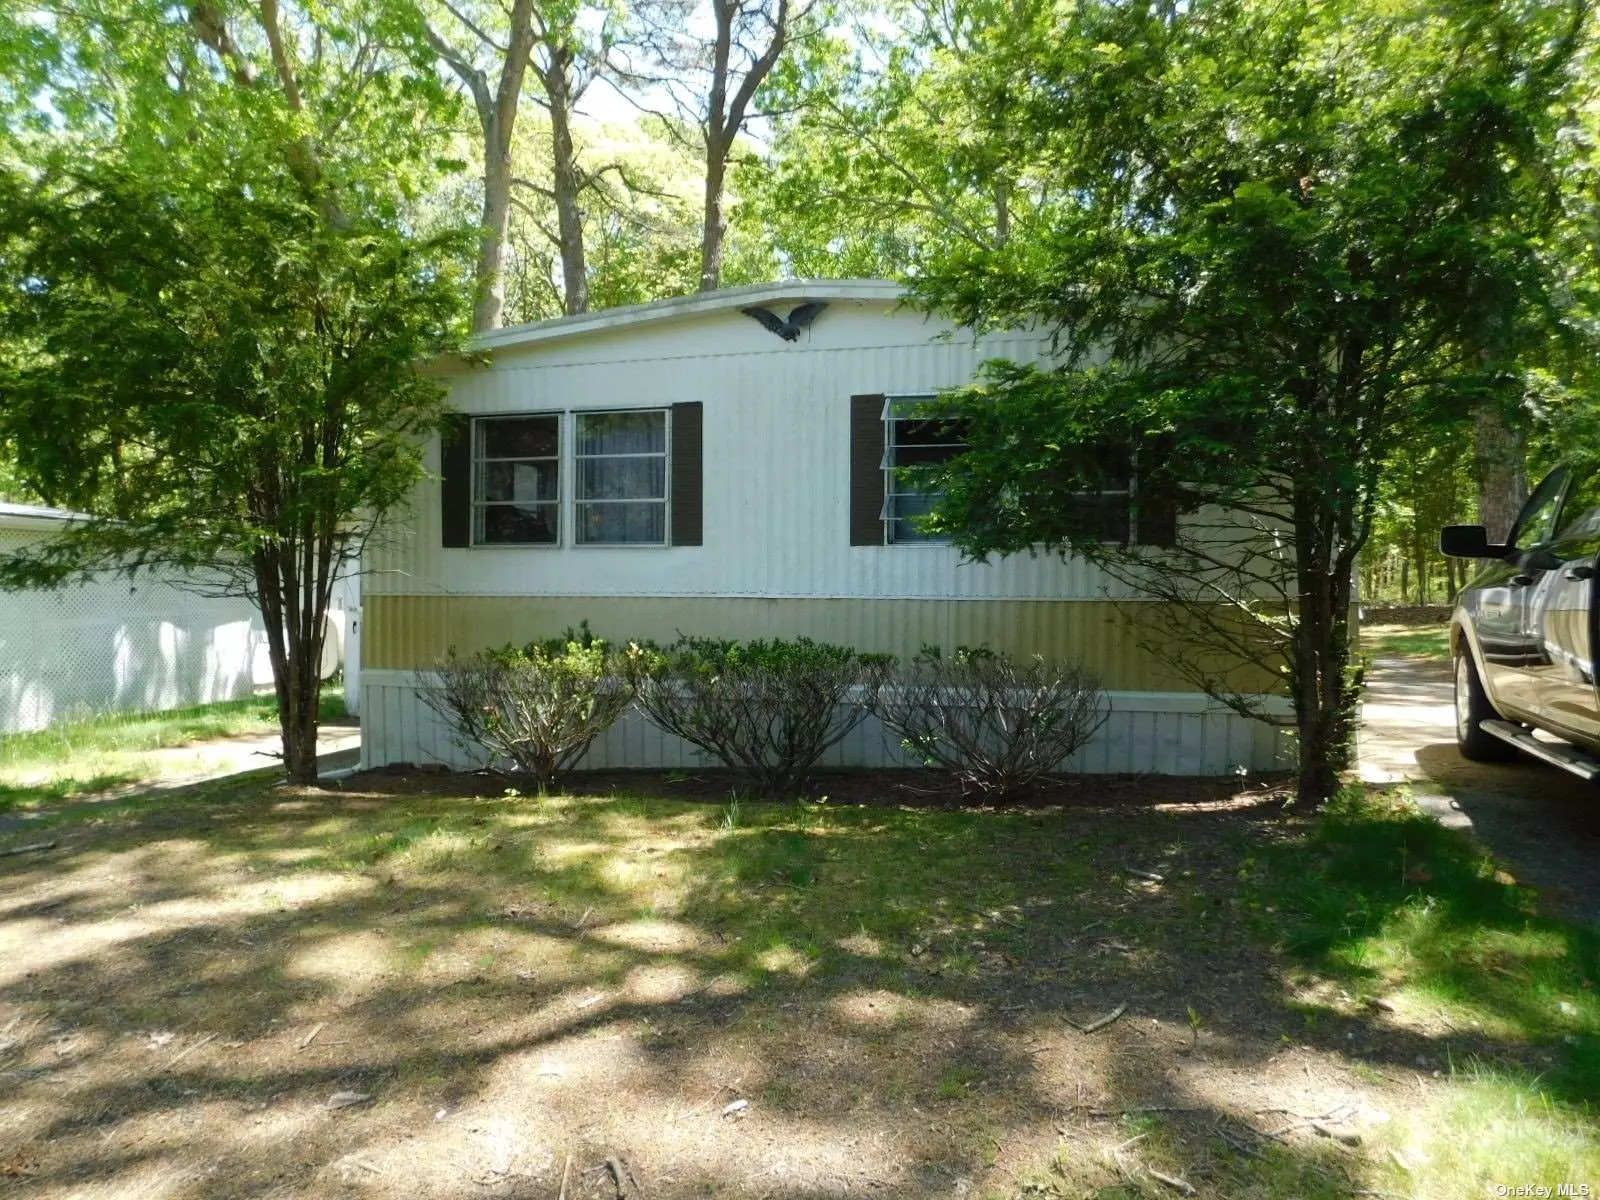 Large 3-bedroom mobile home, 2 baths, backs to woods - private location. Needs total renovation sold all cash as-is only.